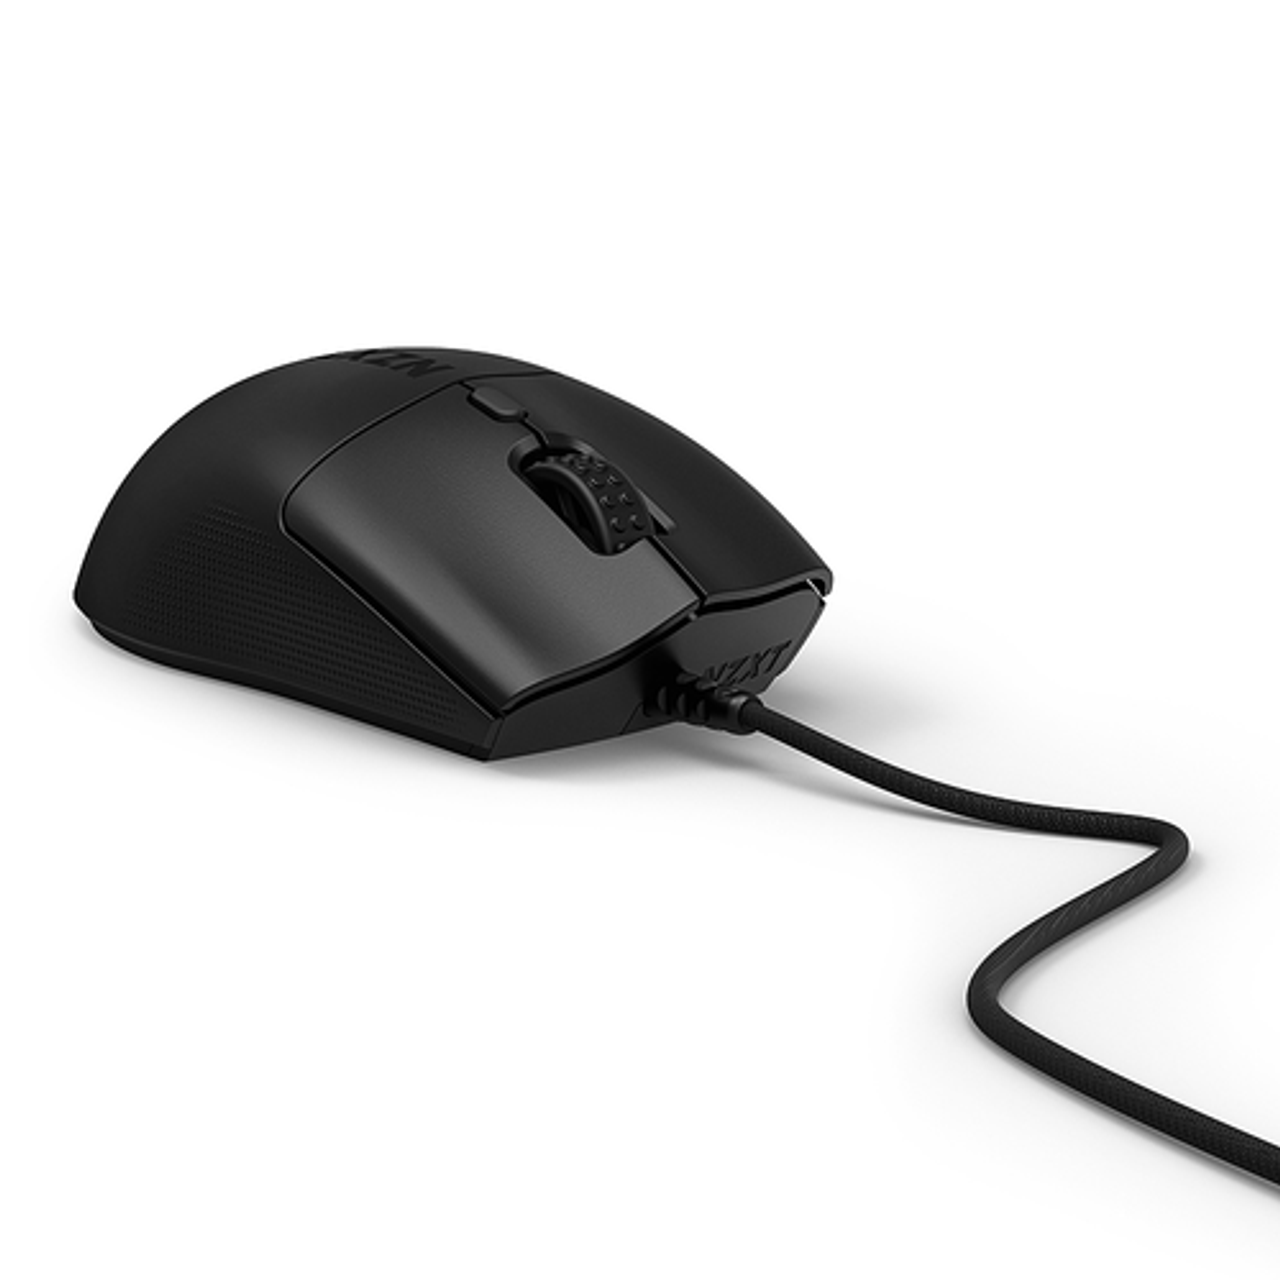 NZXT - Lift 2 Ergo - Lightweight Ergonomic Wired Gaming Mouse - Black